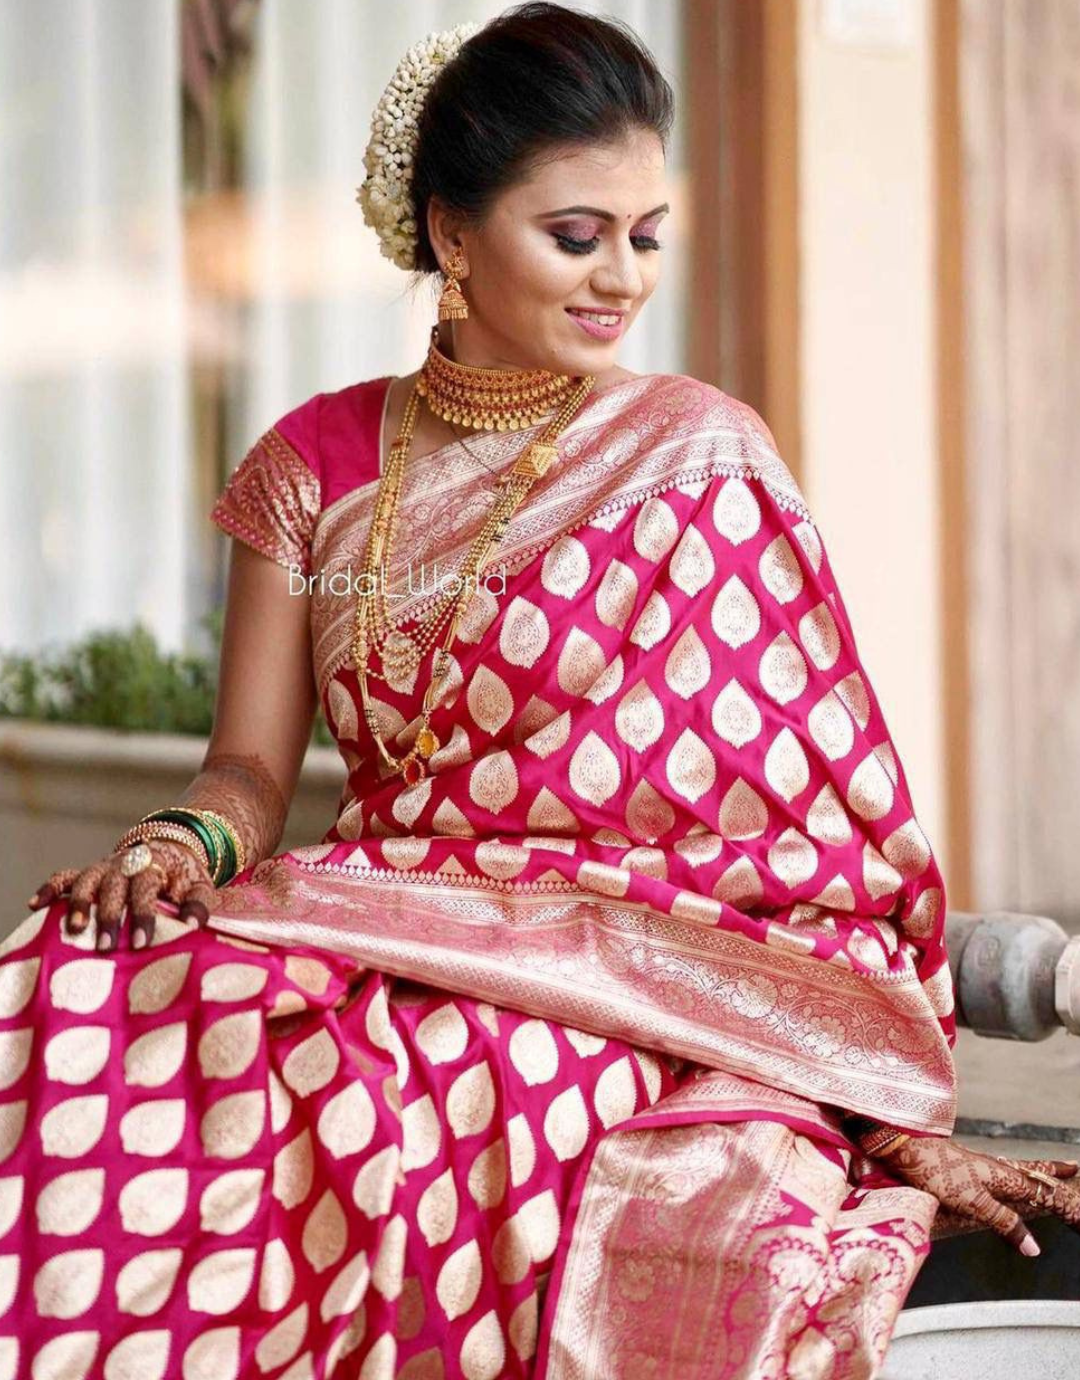 How to Style a Banarasi Saree in Different Ways - Major Mag